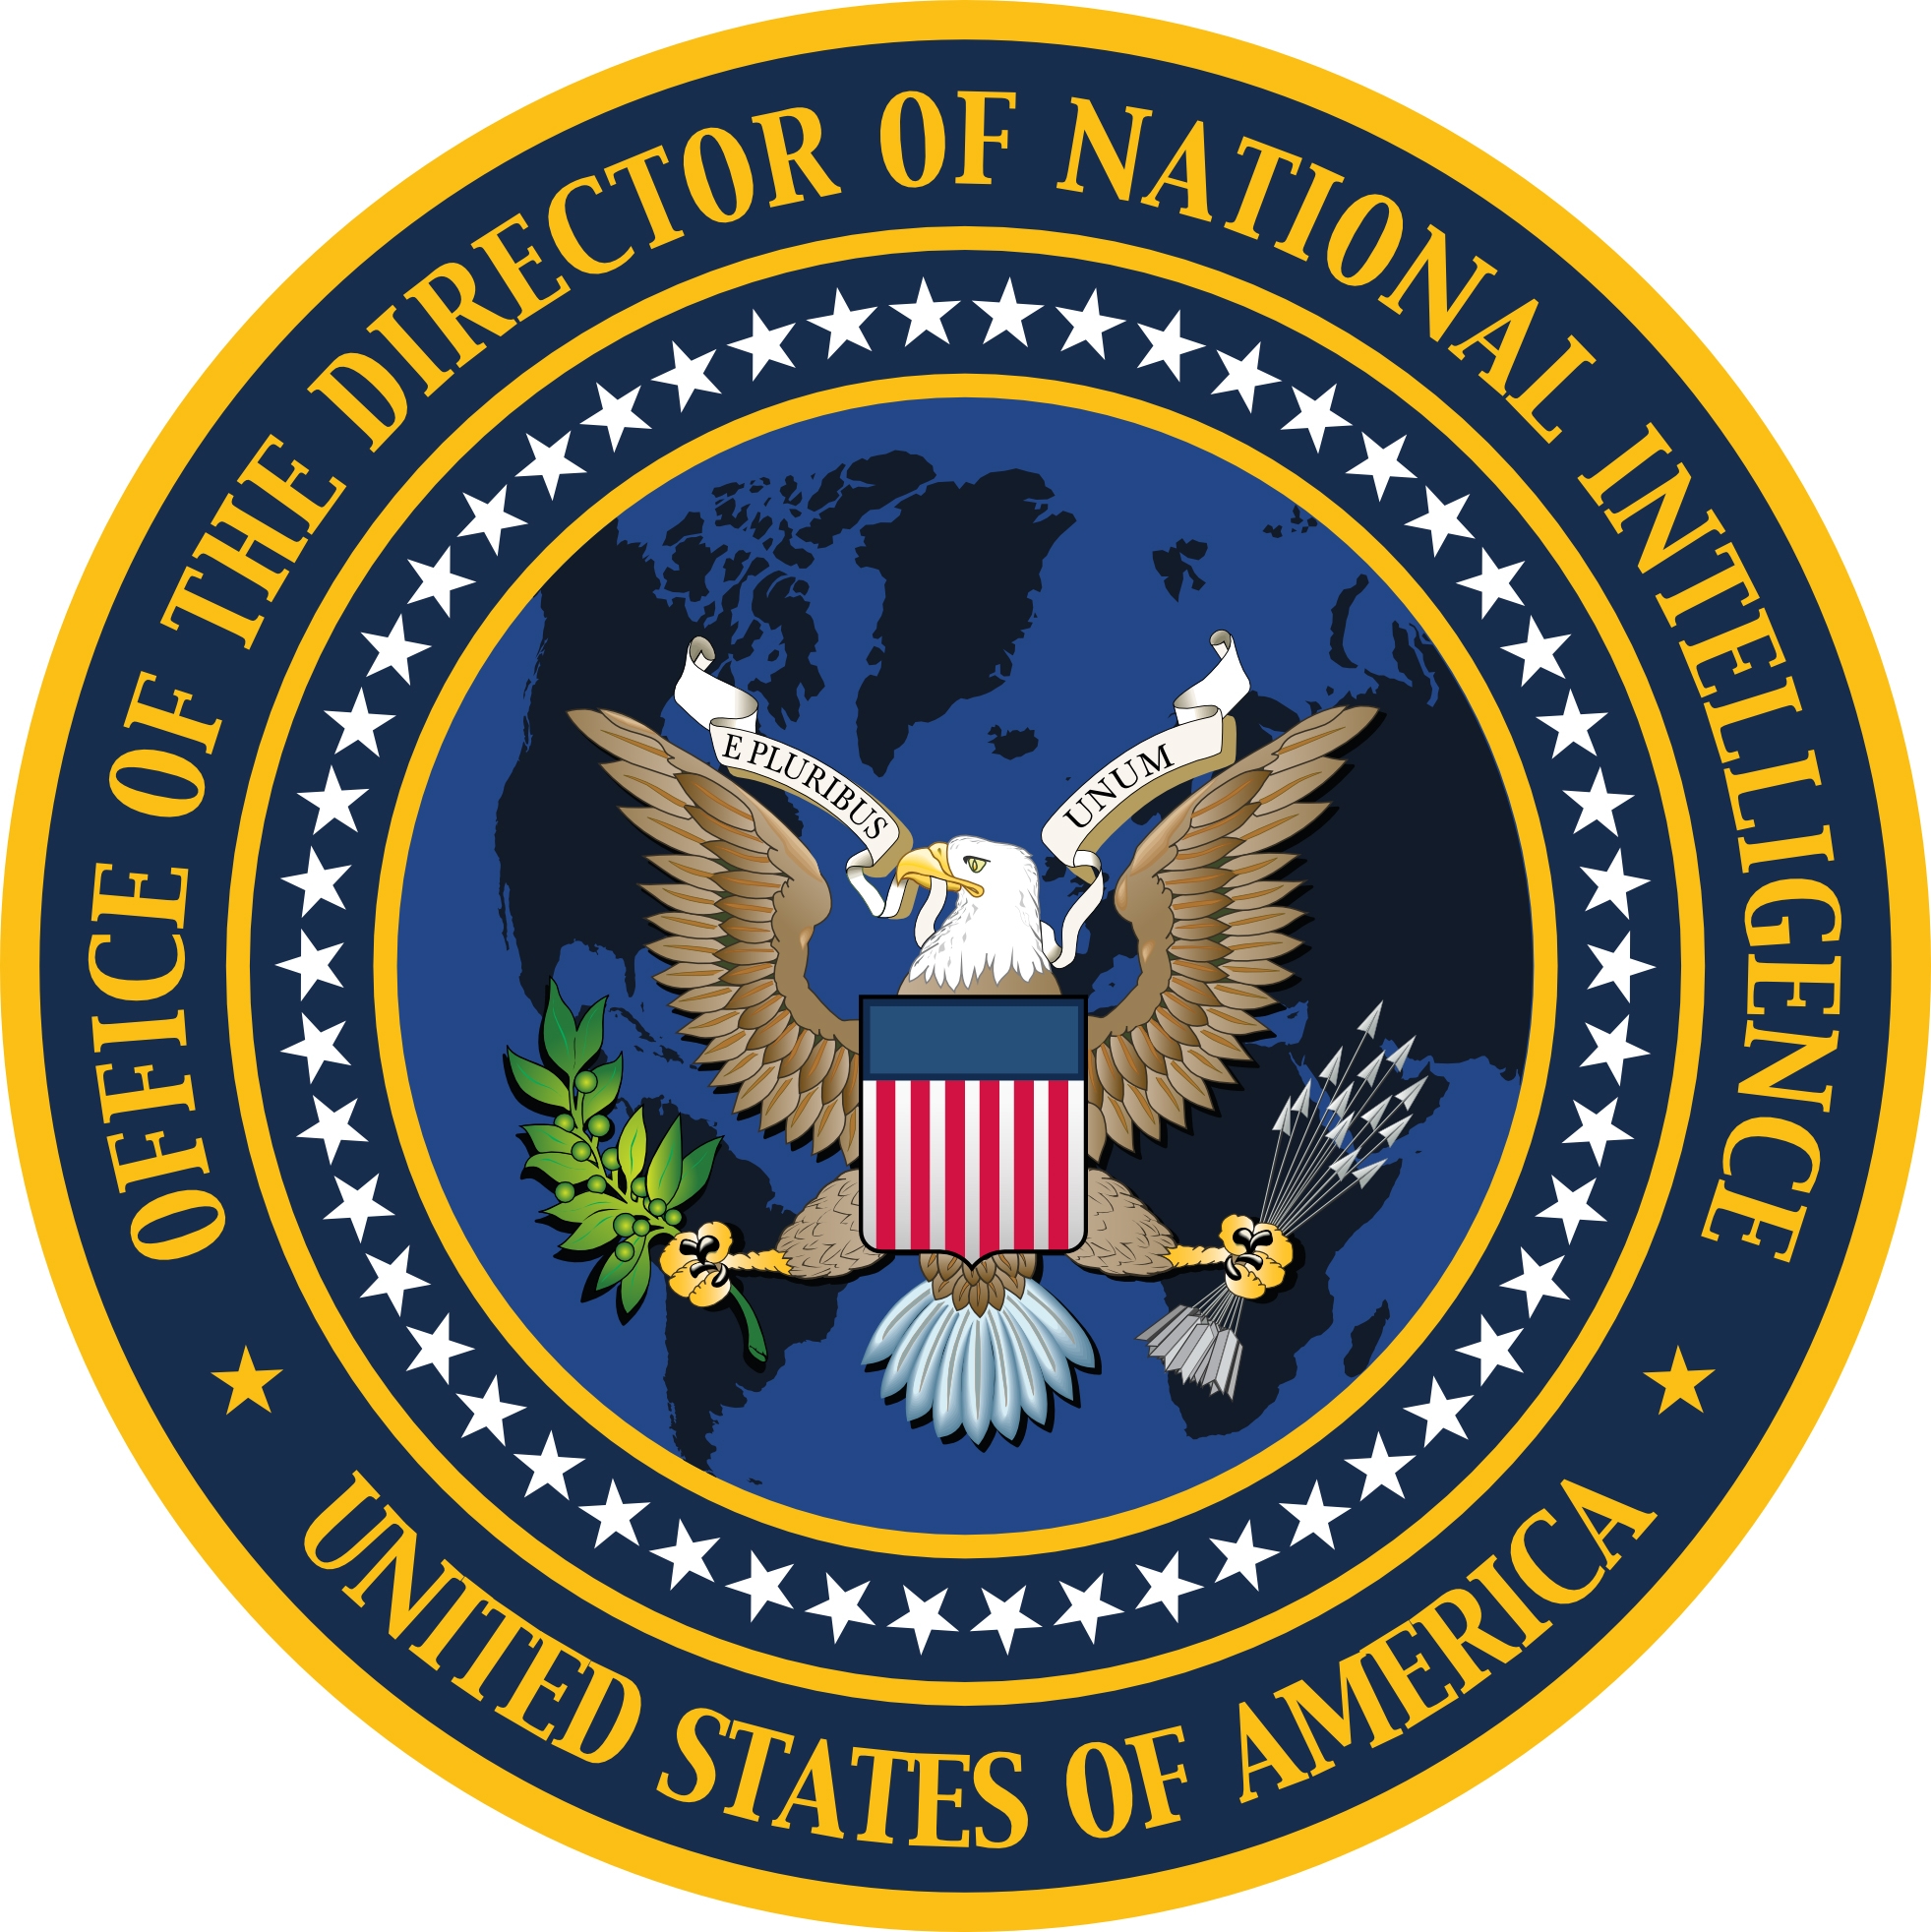 Office of the Director of National Intelligence - United States of America